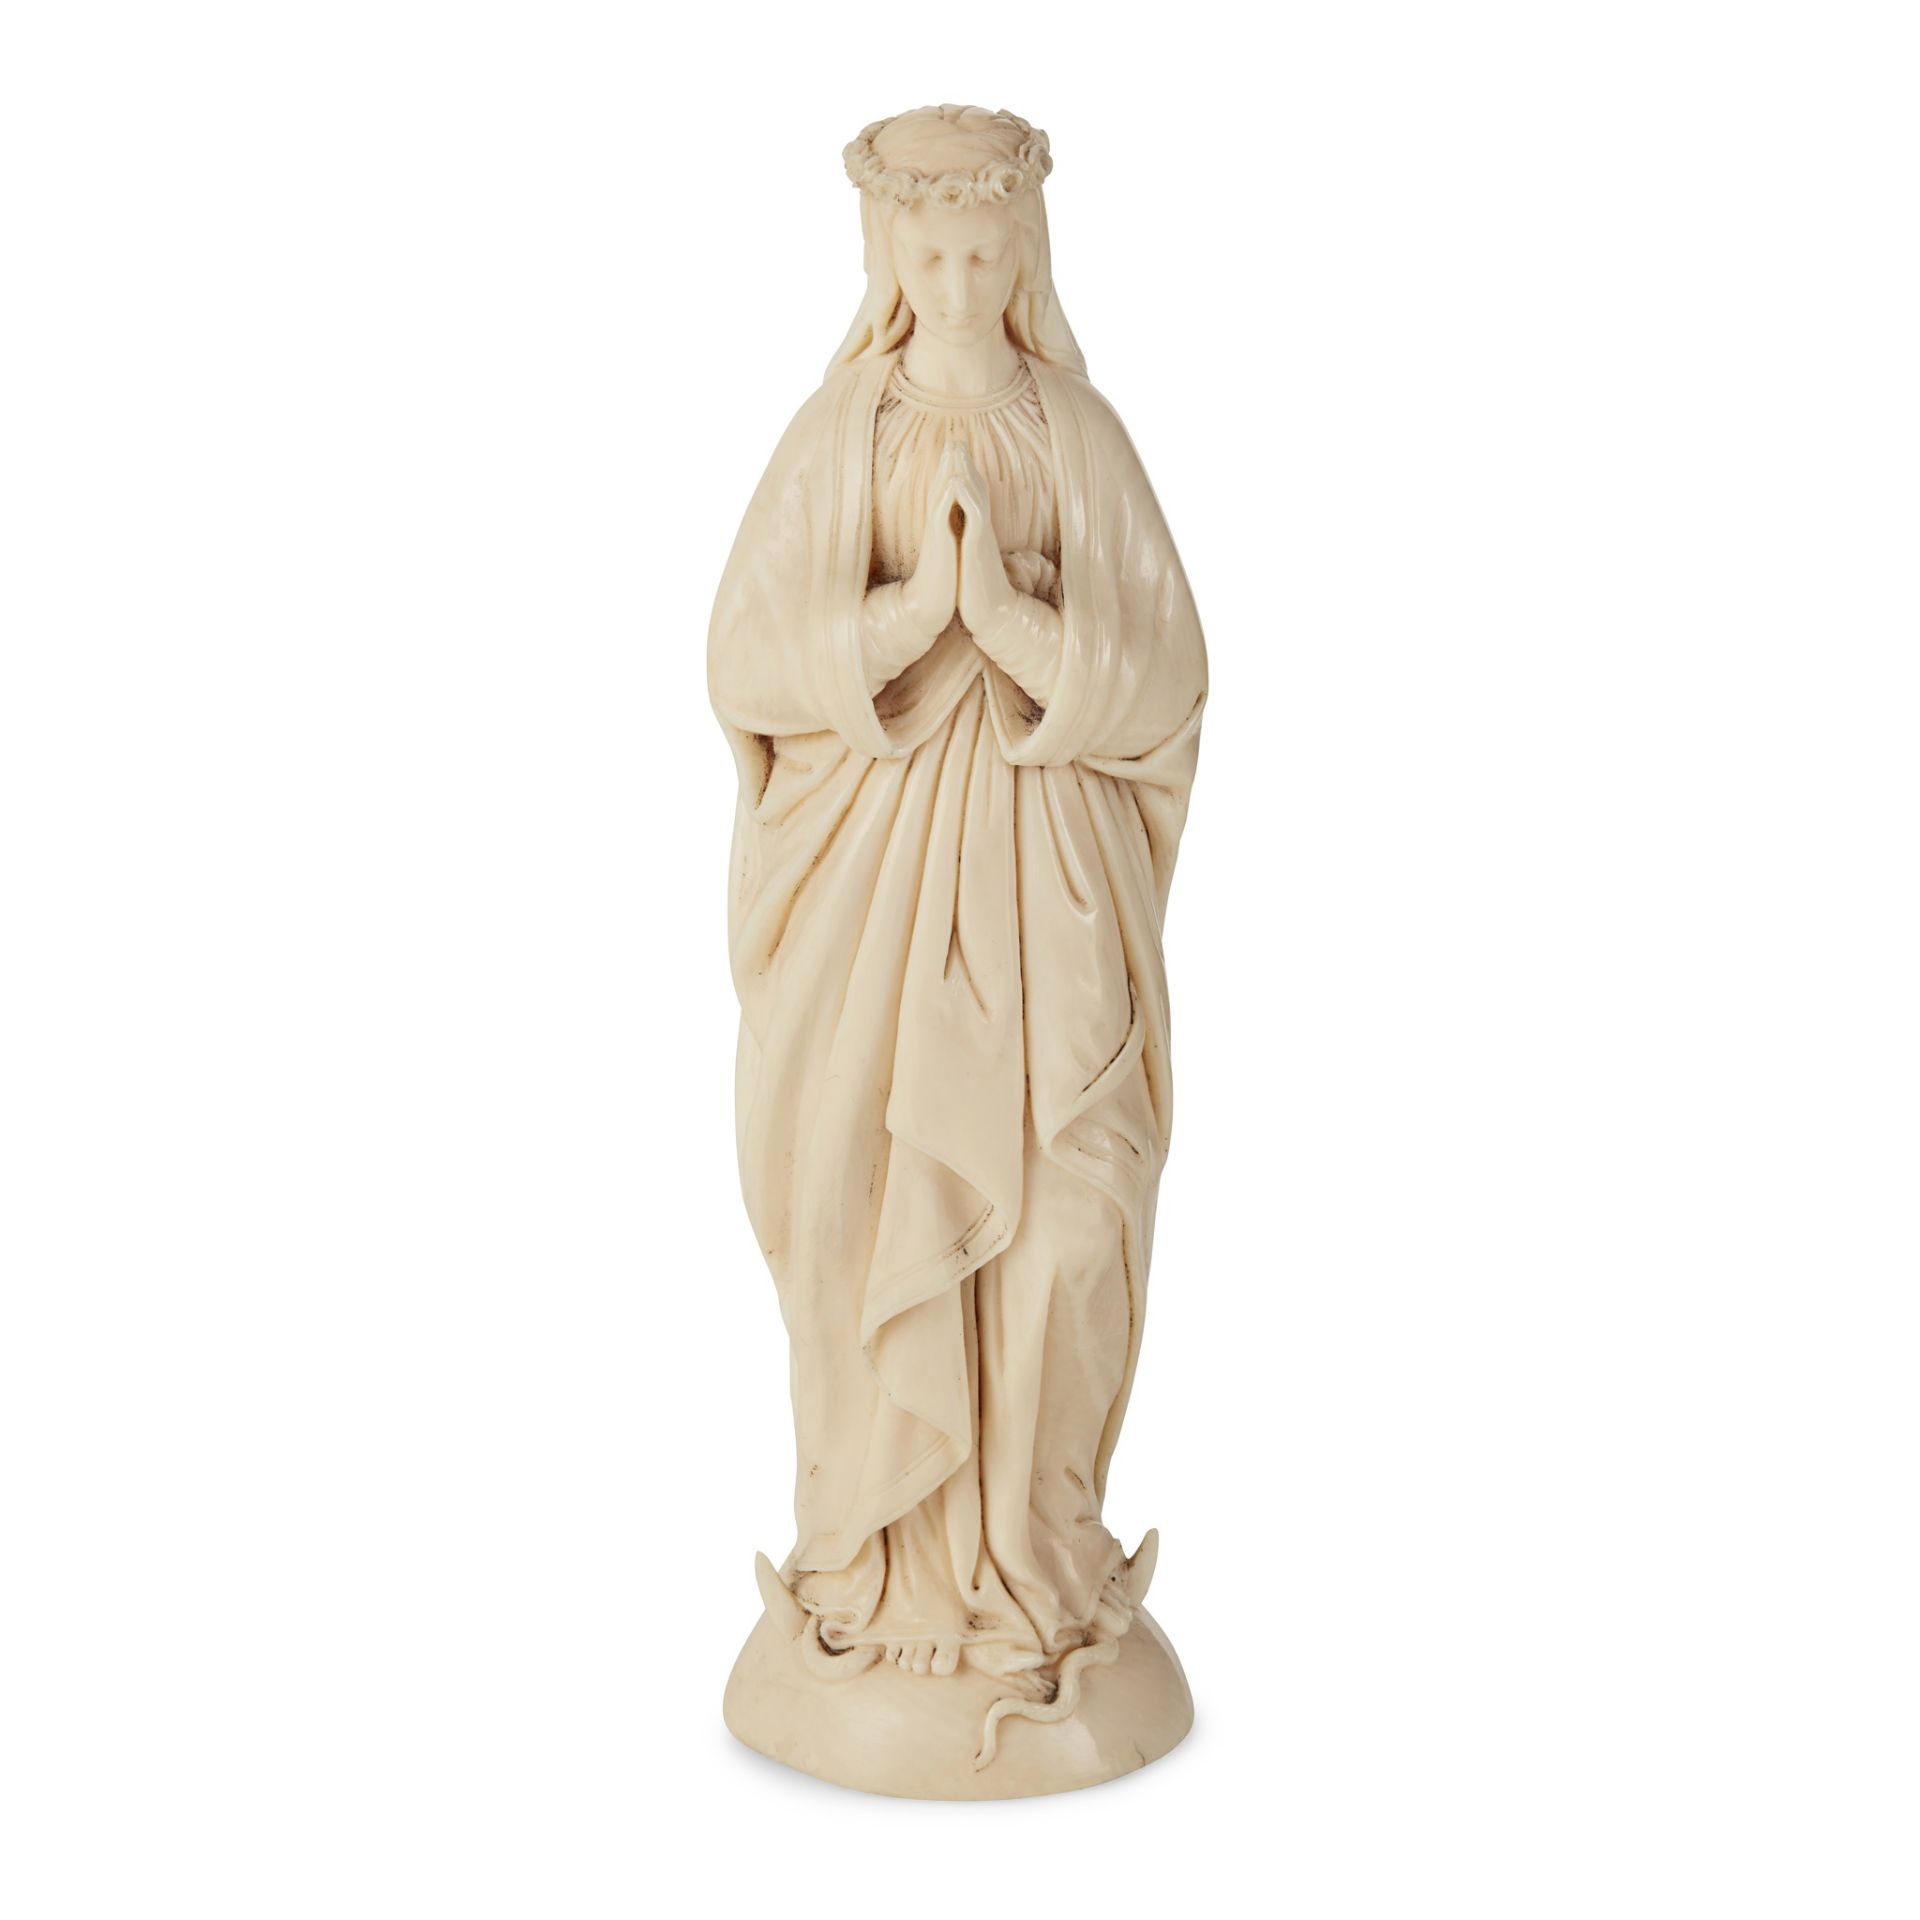 Y CARVED IVORY FIGURE OF THE VIRGIN AND THE SERPENT LATE 19TH/ EARLY 20TH CENTURY